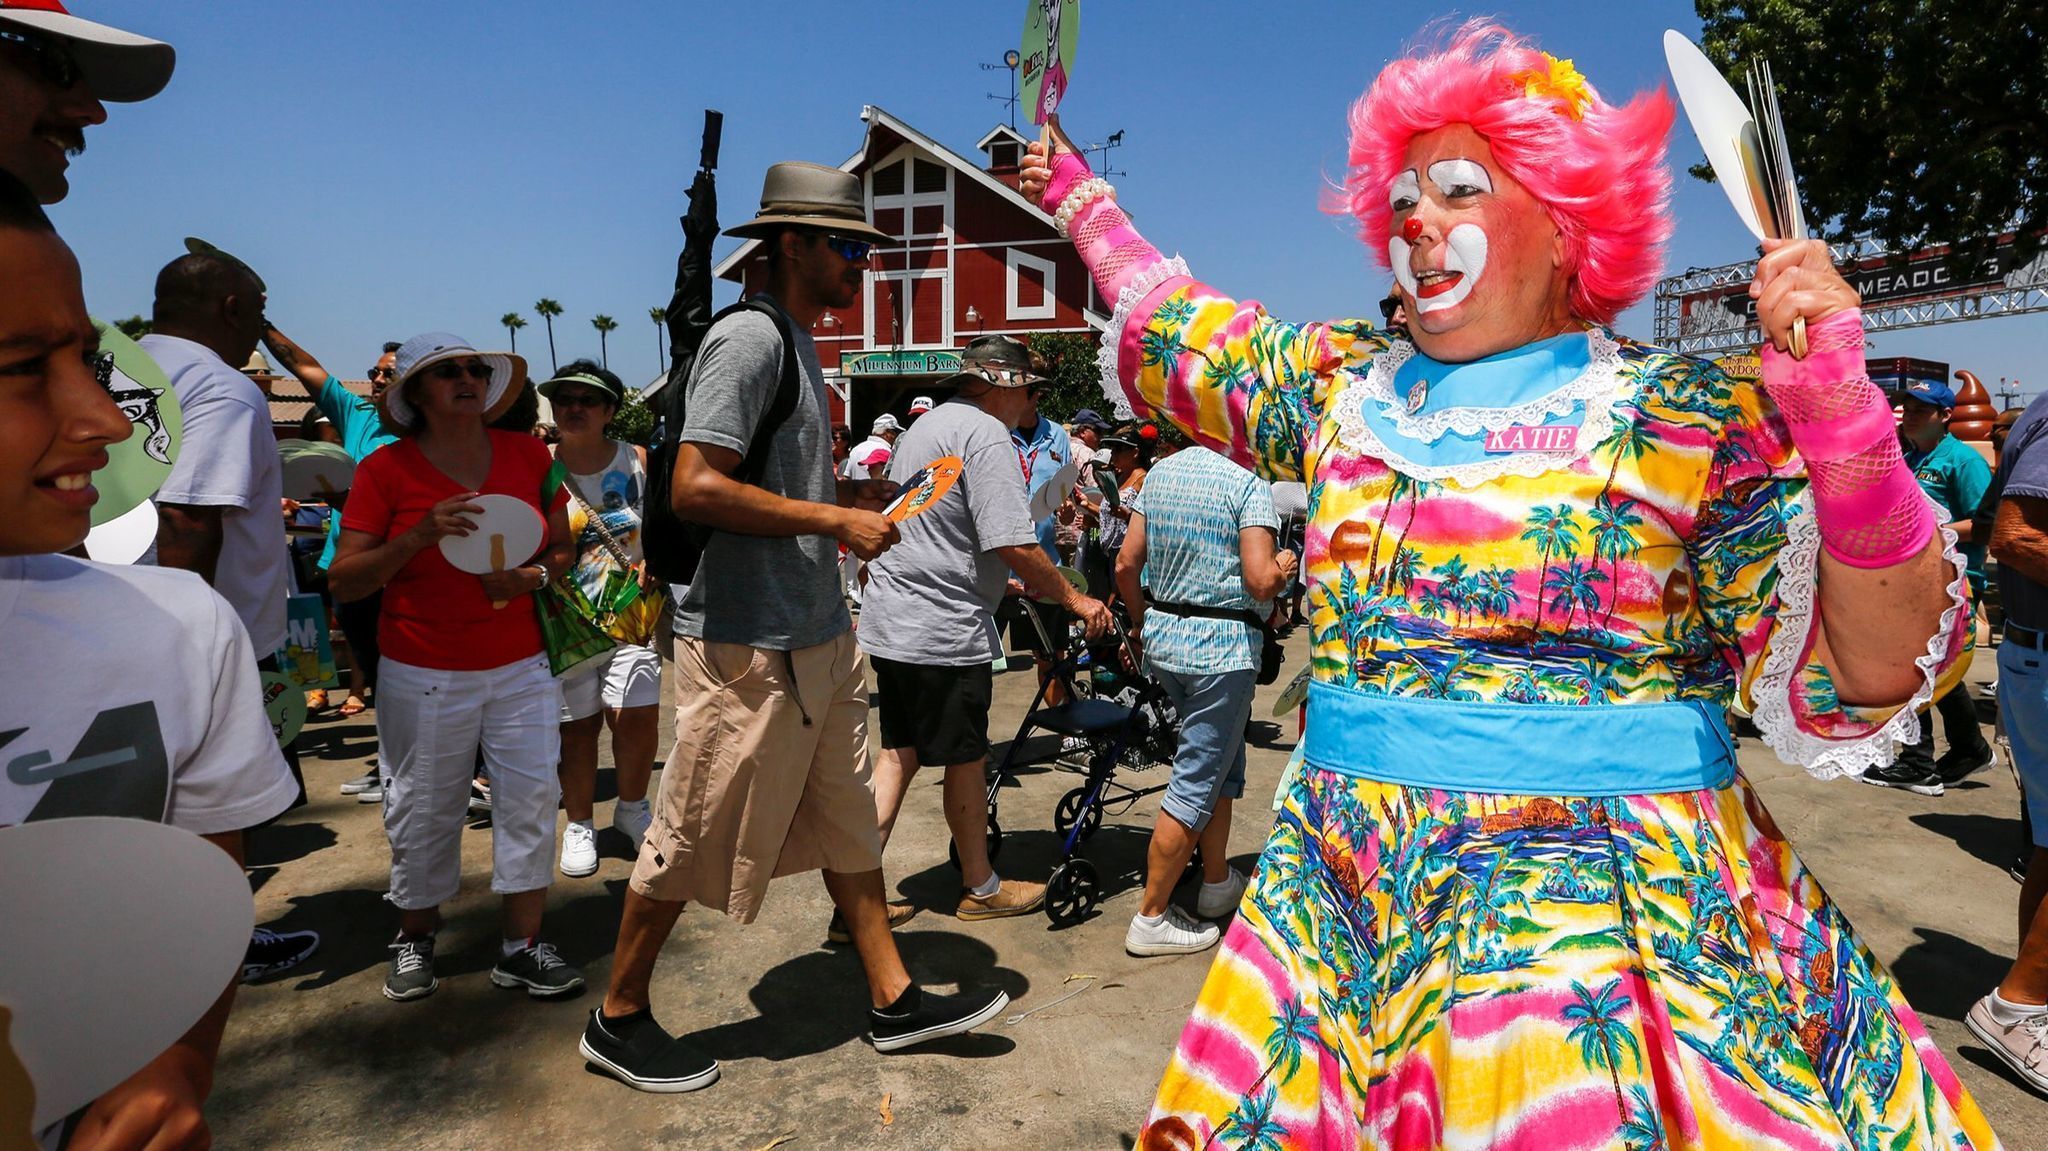 Two-fer deal on admission to O.C. and Ventura County fairs - LA Times